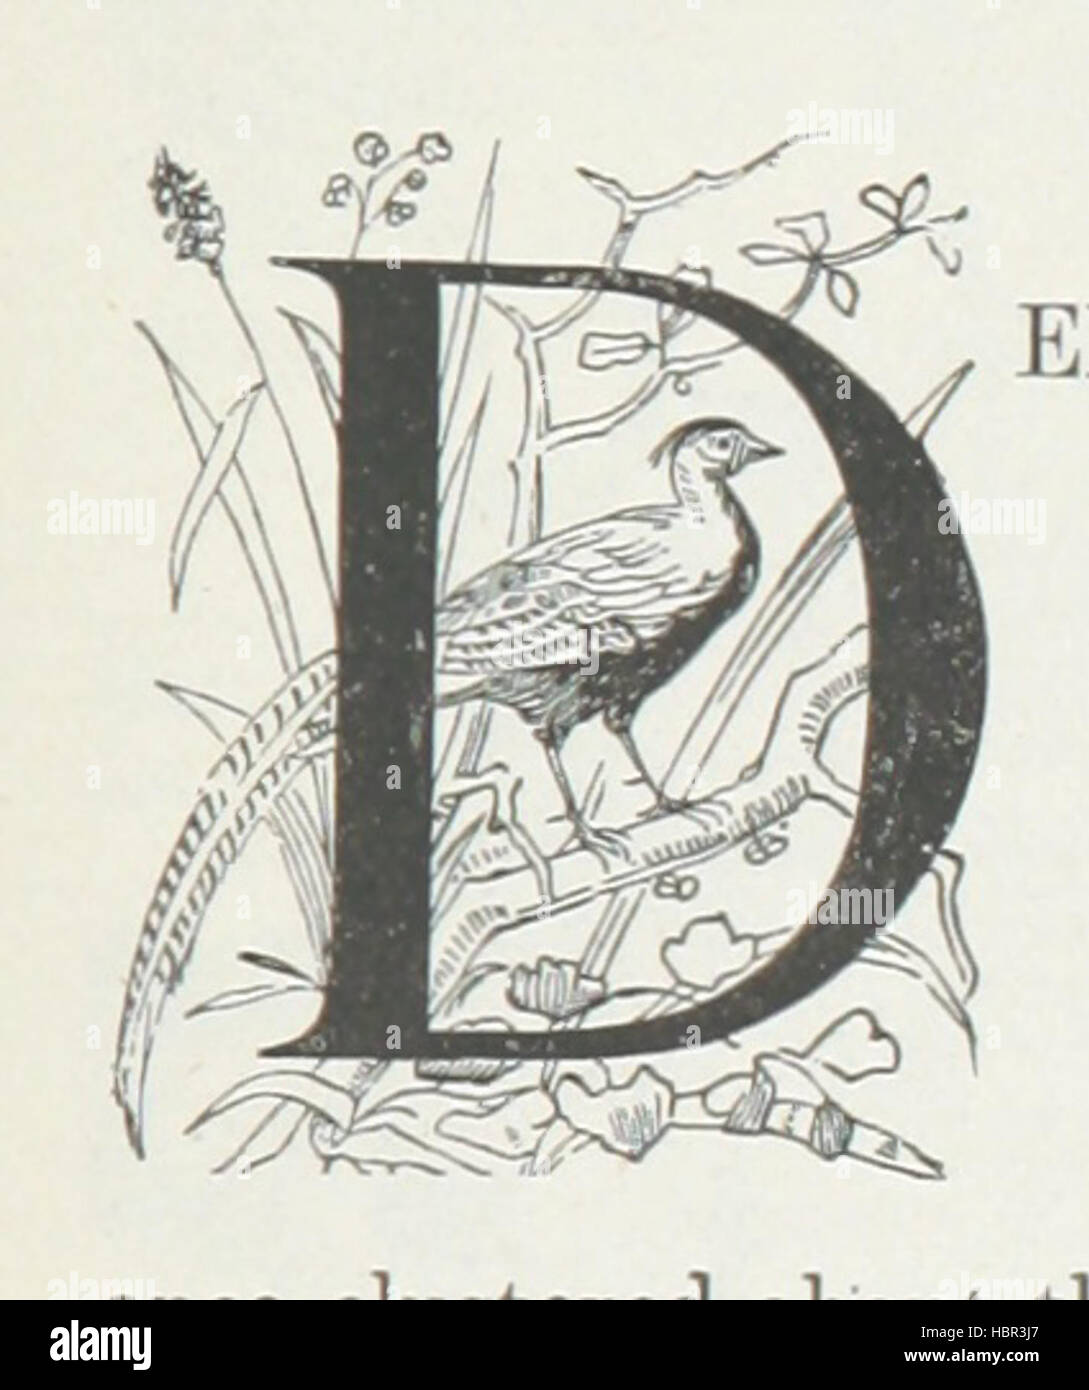 Image taken from page 249 of 'Annals of Hyde and district. Containing historical reminiscences of Denton, Haughton, Dukinfield, Mottram, Longdendale, Bredbury, Marple, and the neighbouring townships. [Illustrated.]' Image taken from page 249 of 'Annals of Hyde and Stock Photo